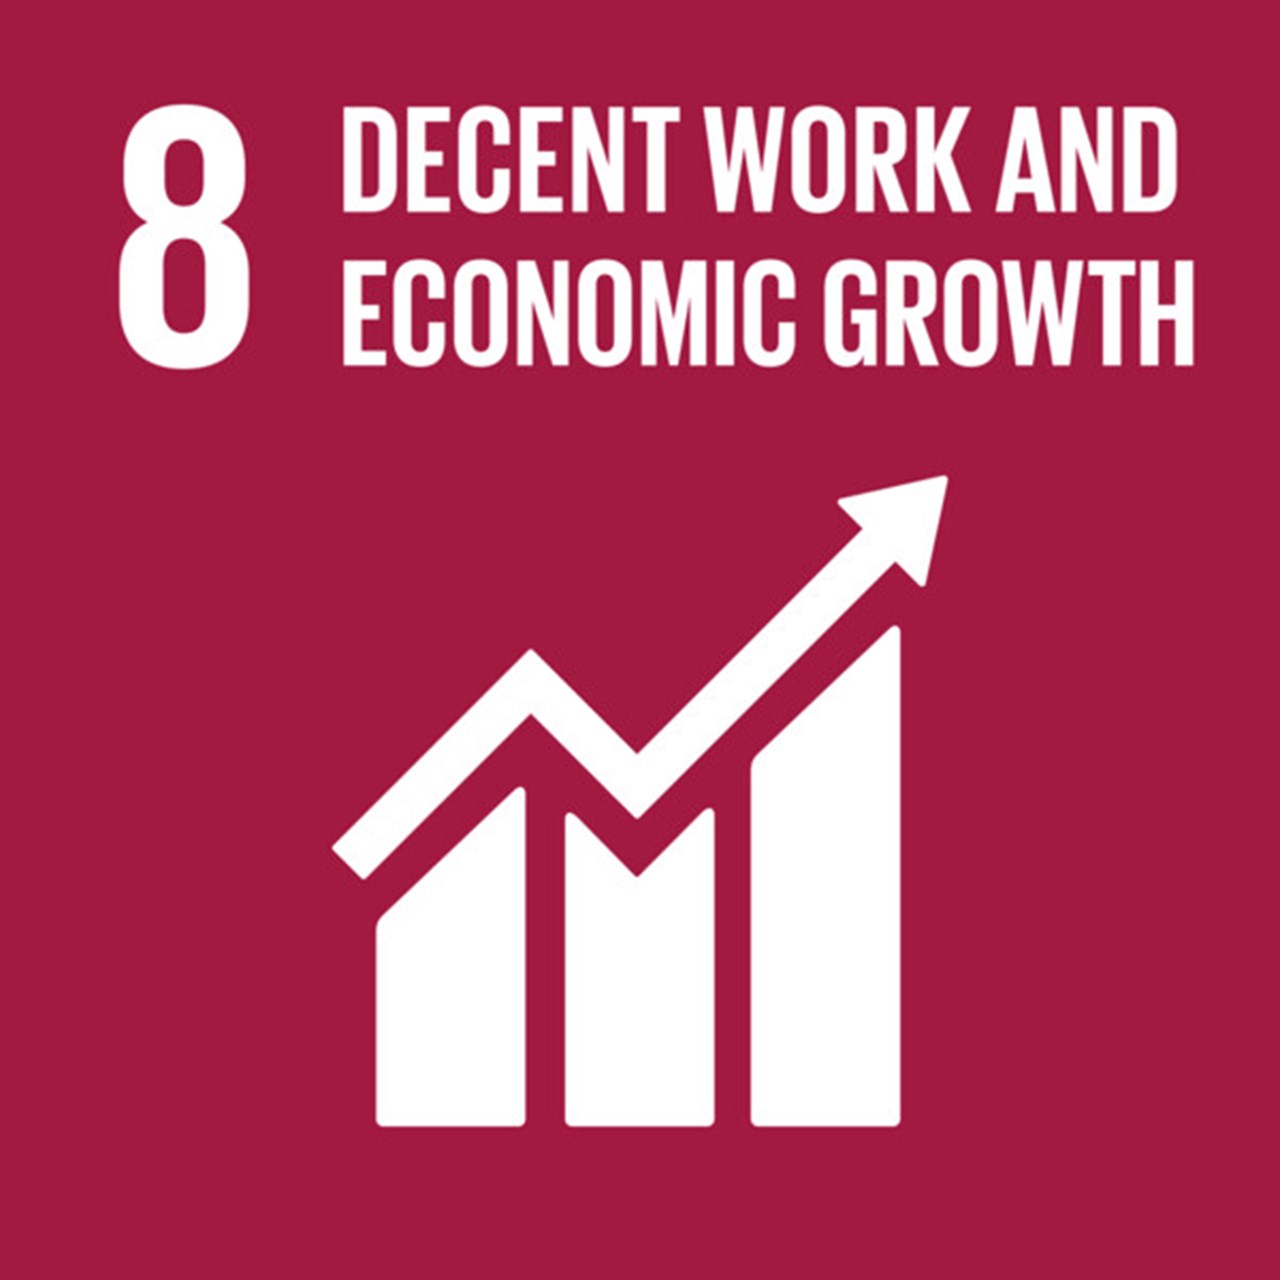 The Global Goals, Goal 8 - Decent Work and Economics Growth